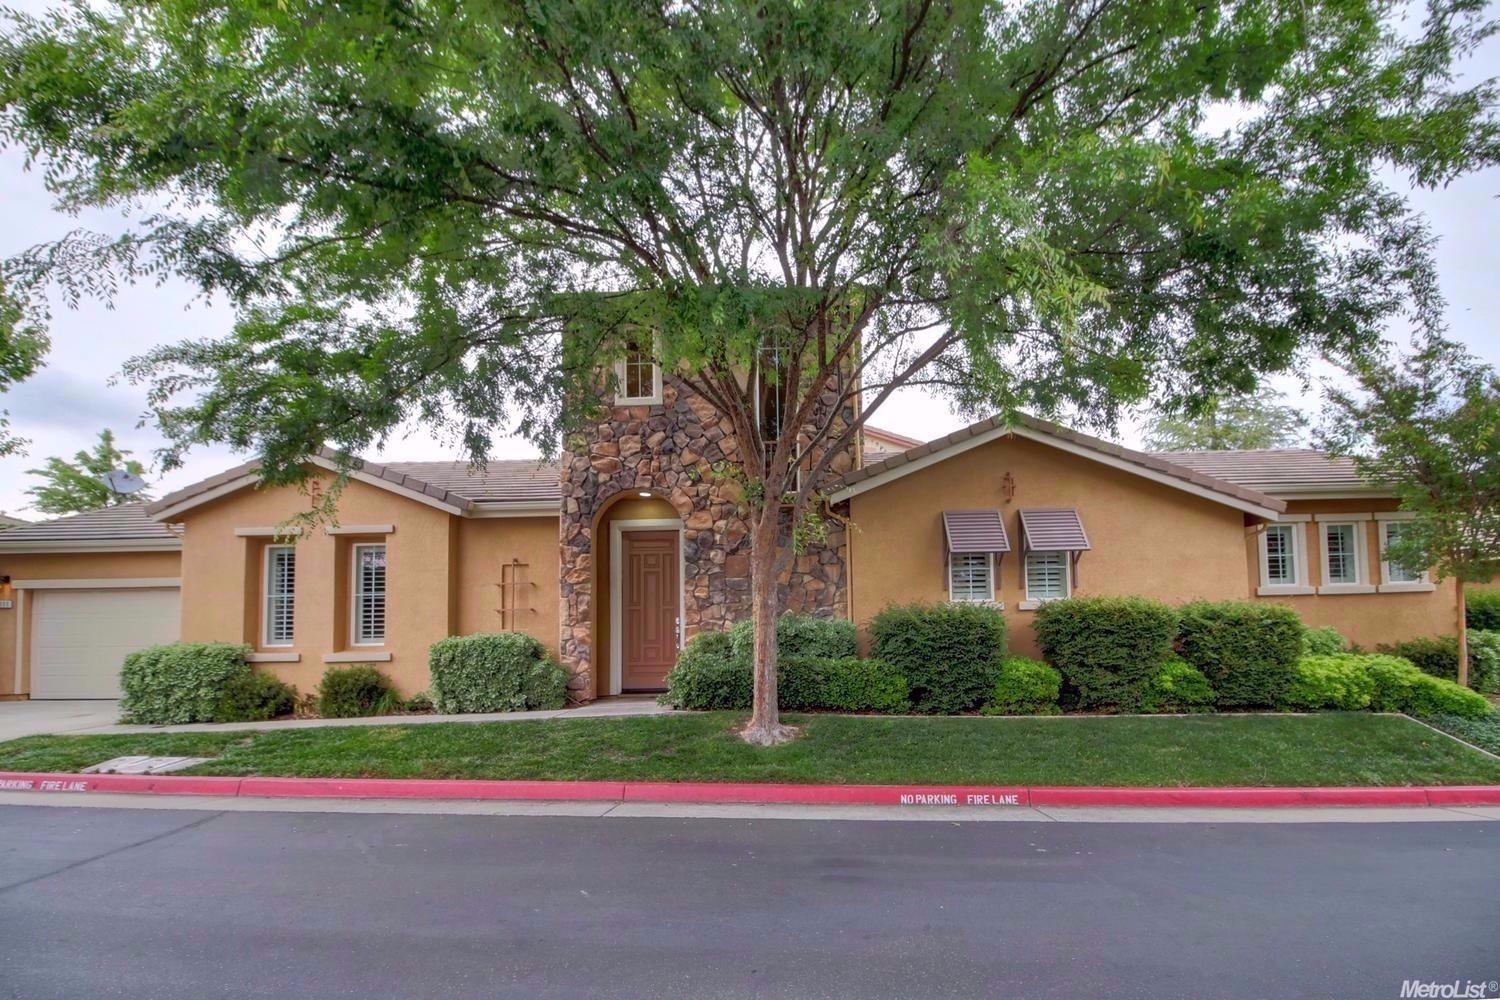 Desirable Whitney Oaks location. Home to top Rocklin schools, access to Olympic sized pool &amp separate pool area, exercise room, parks, trails &amp bbq areas.